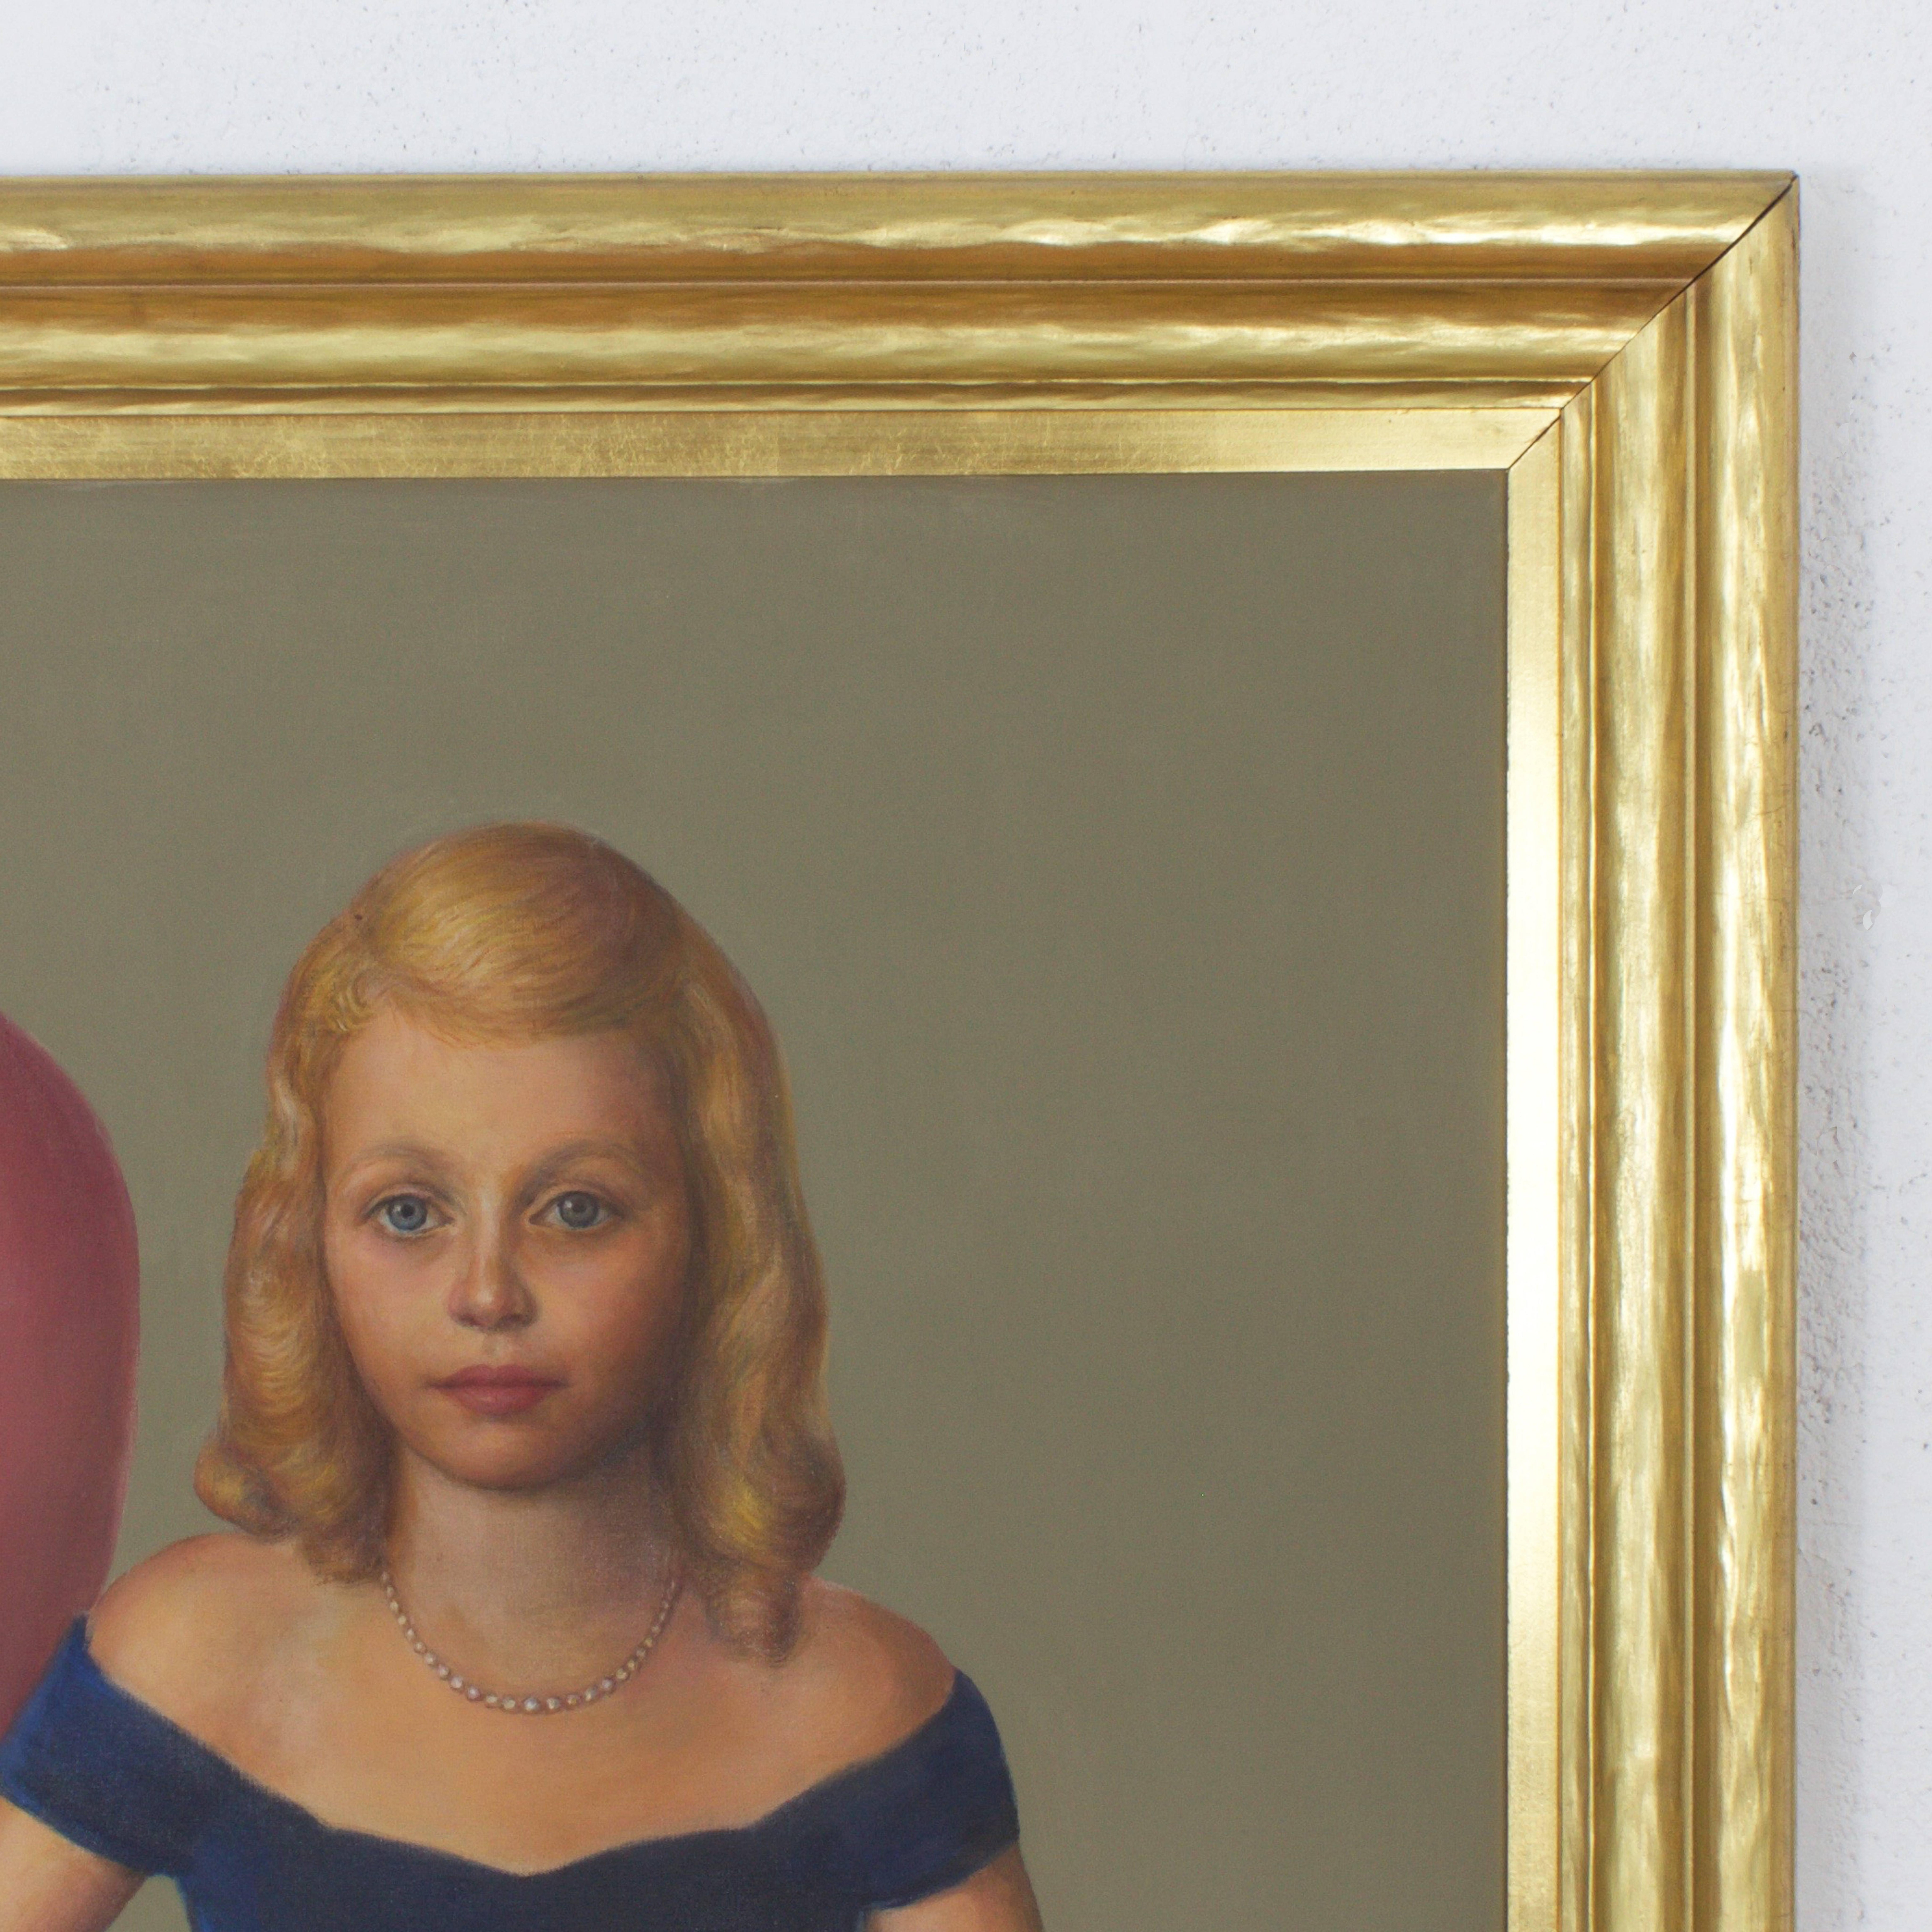 Mysterious mid century oil painting of blonde haired blue eyed twins with a socialite air about them. Like a postcard from the past that asks: Who are they and what was their story? Presented in an impressive gold frame and signed 